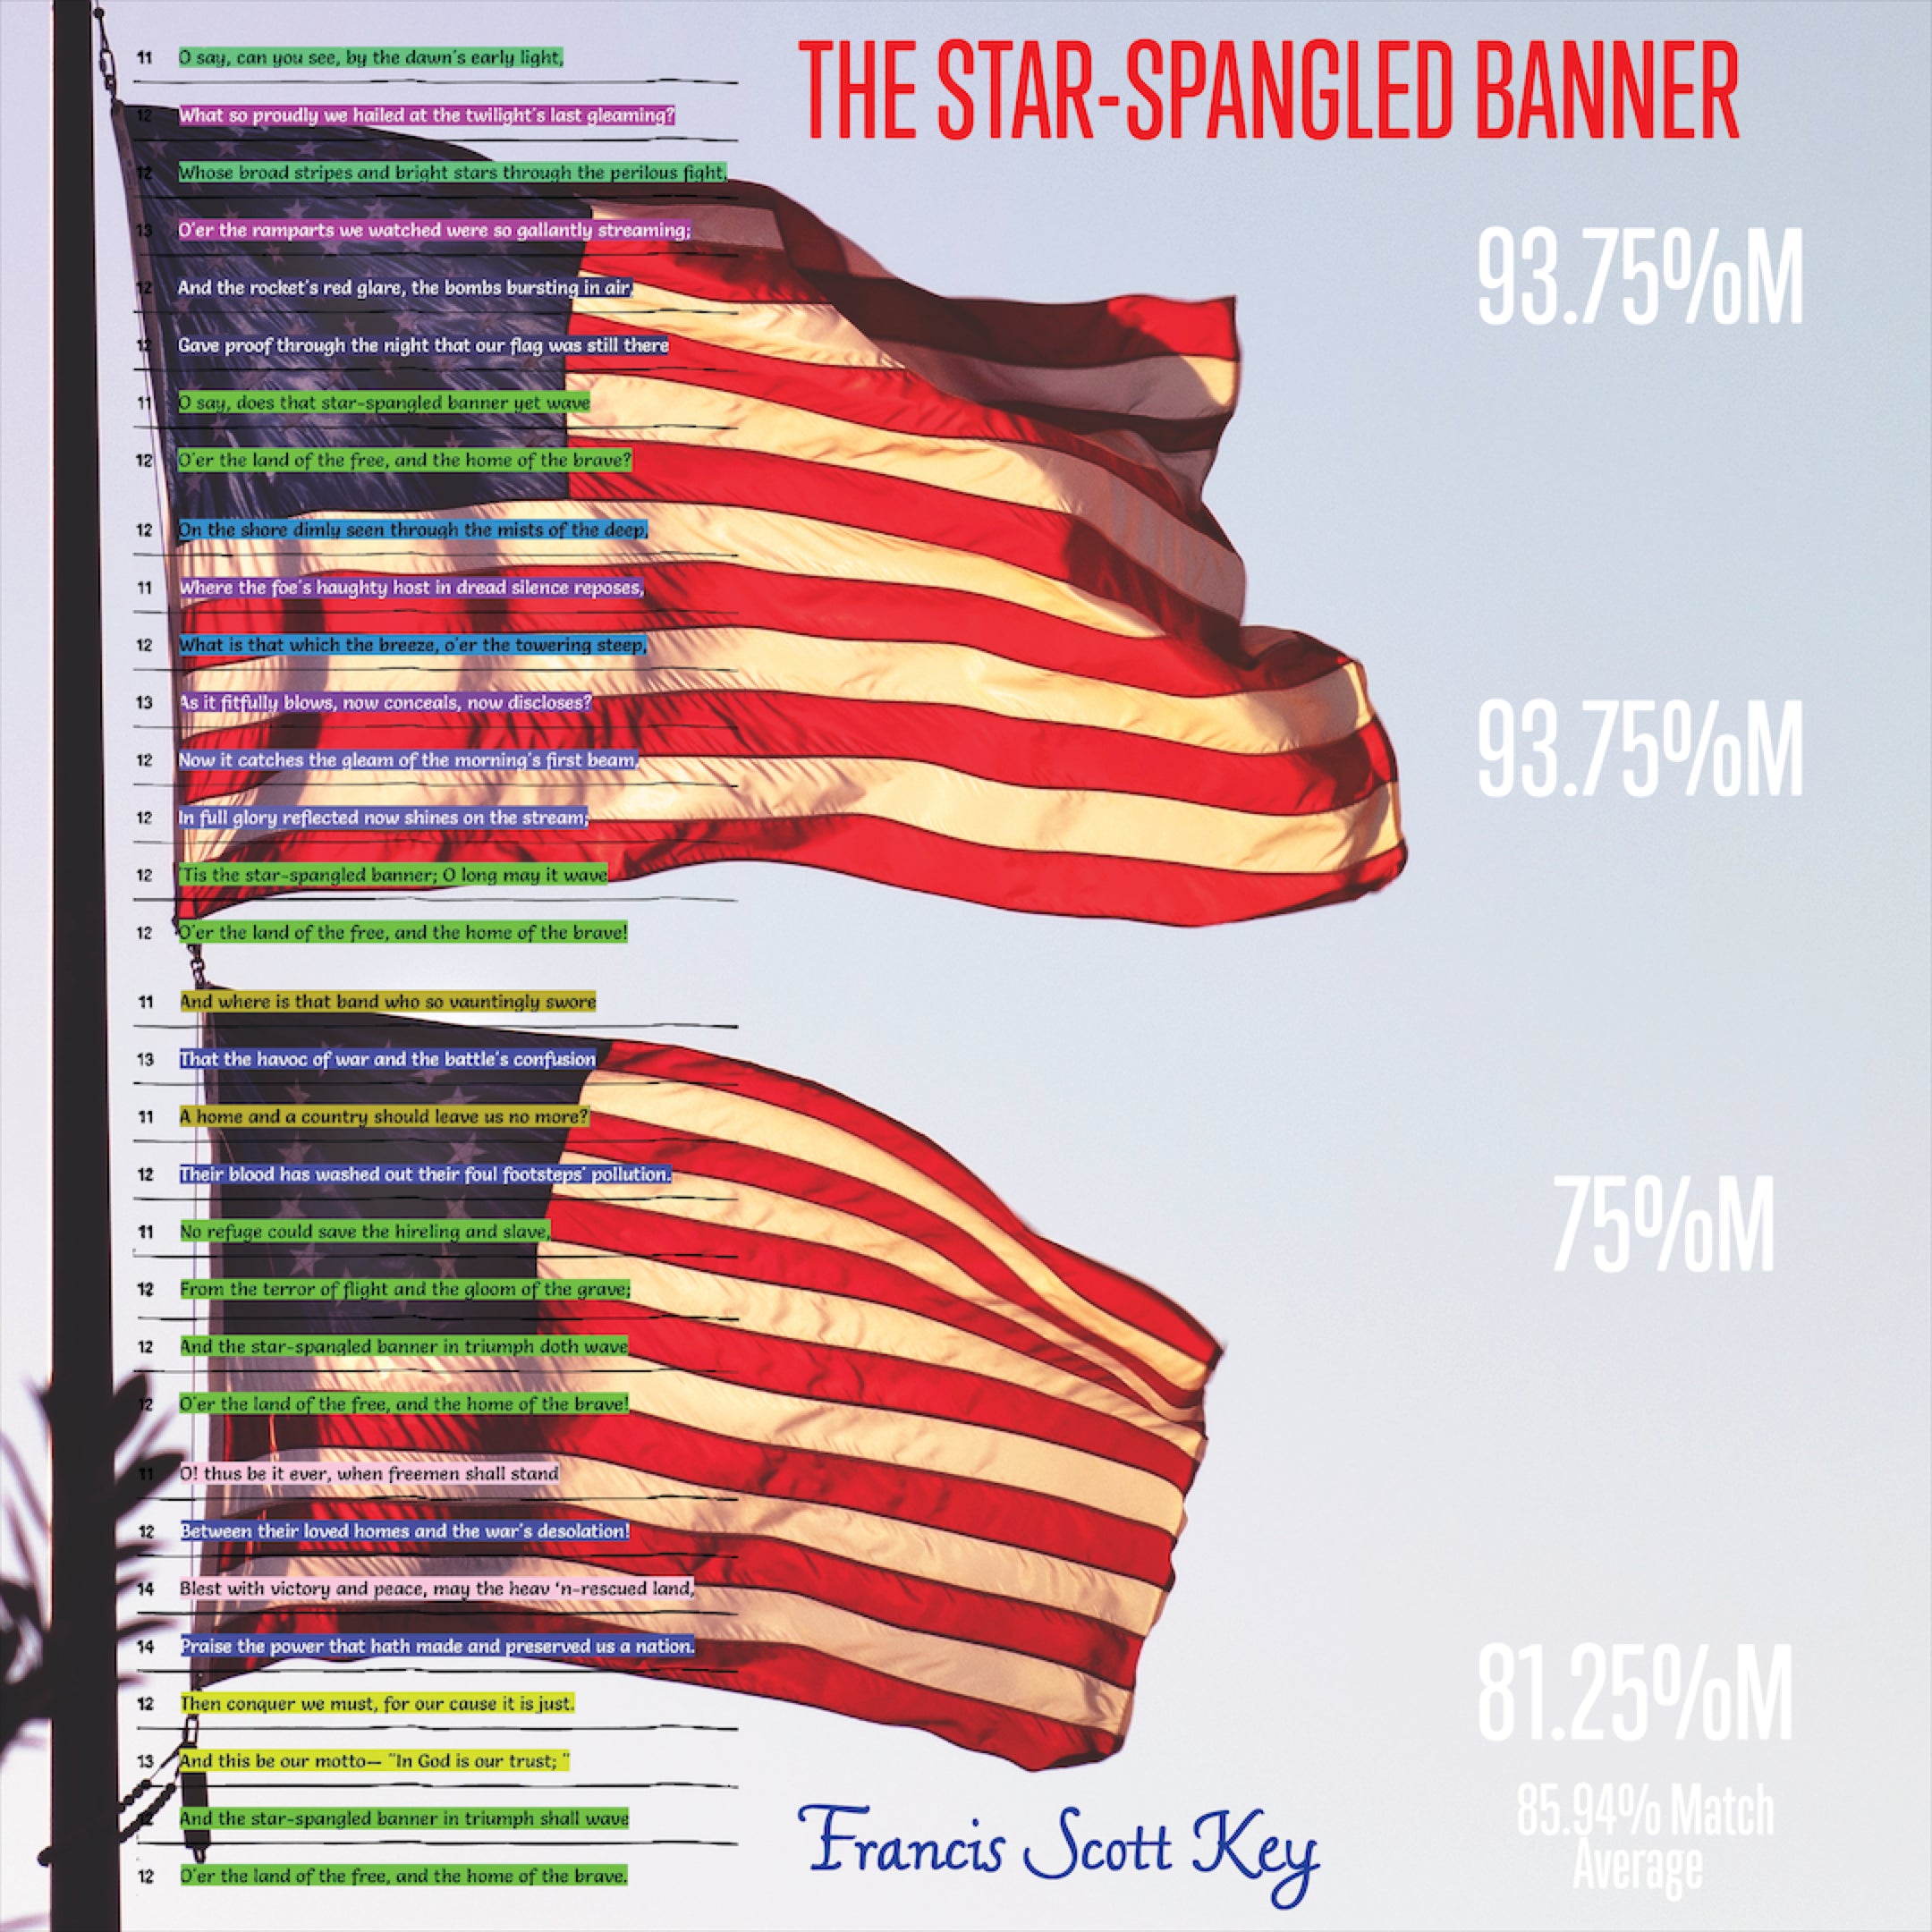 THE STAR-SPANGLED BANNER by Francis Scott Key - Poet Tree Poetry